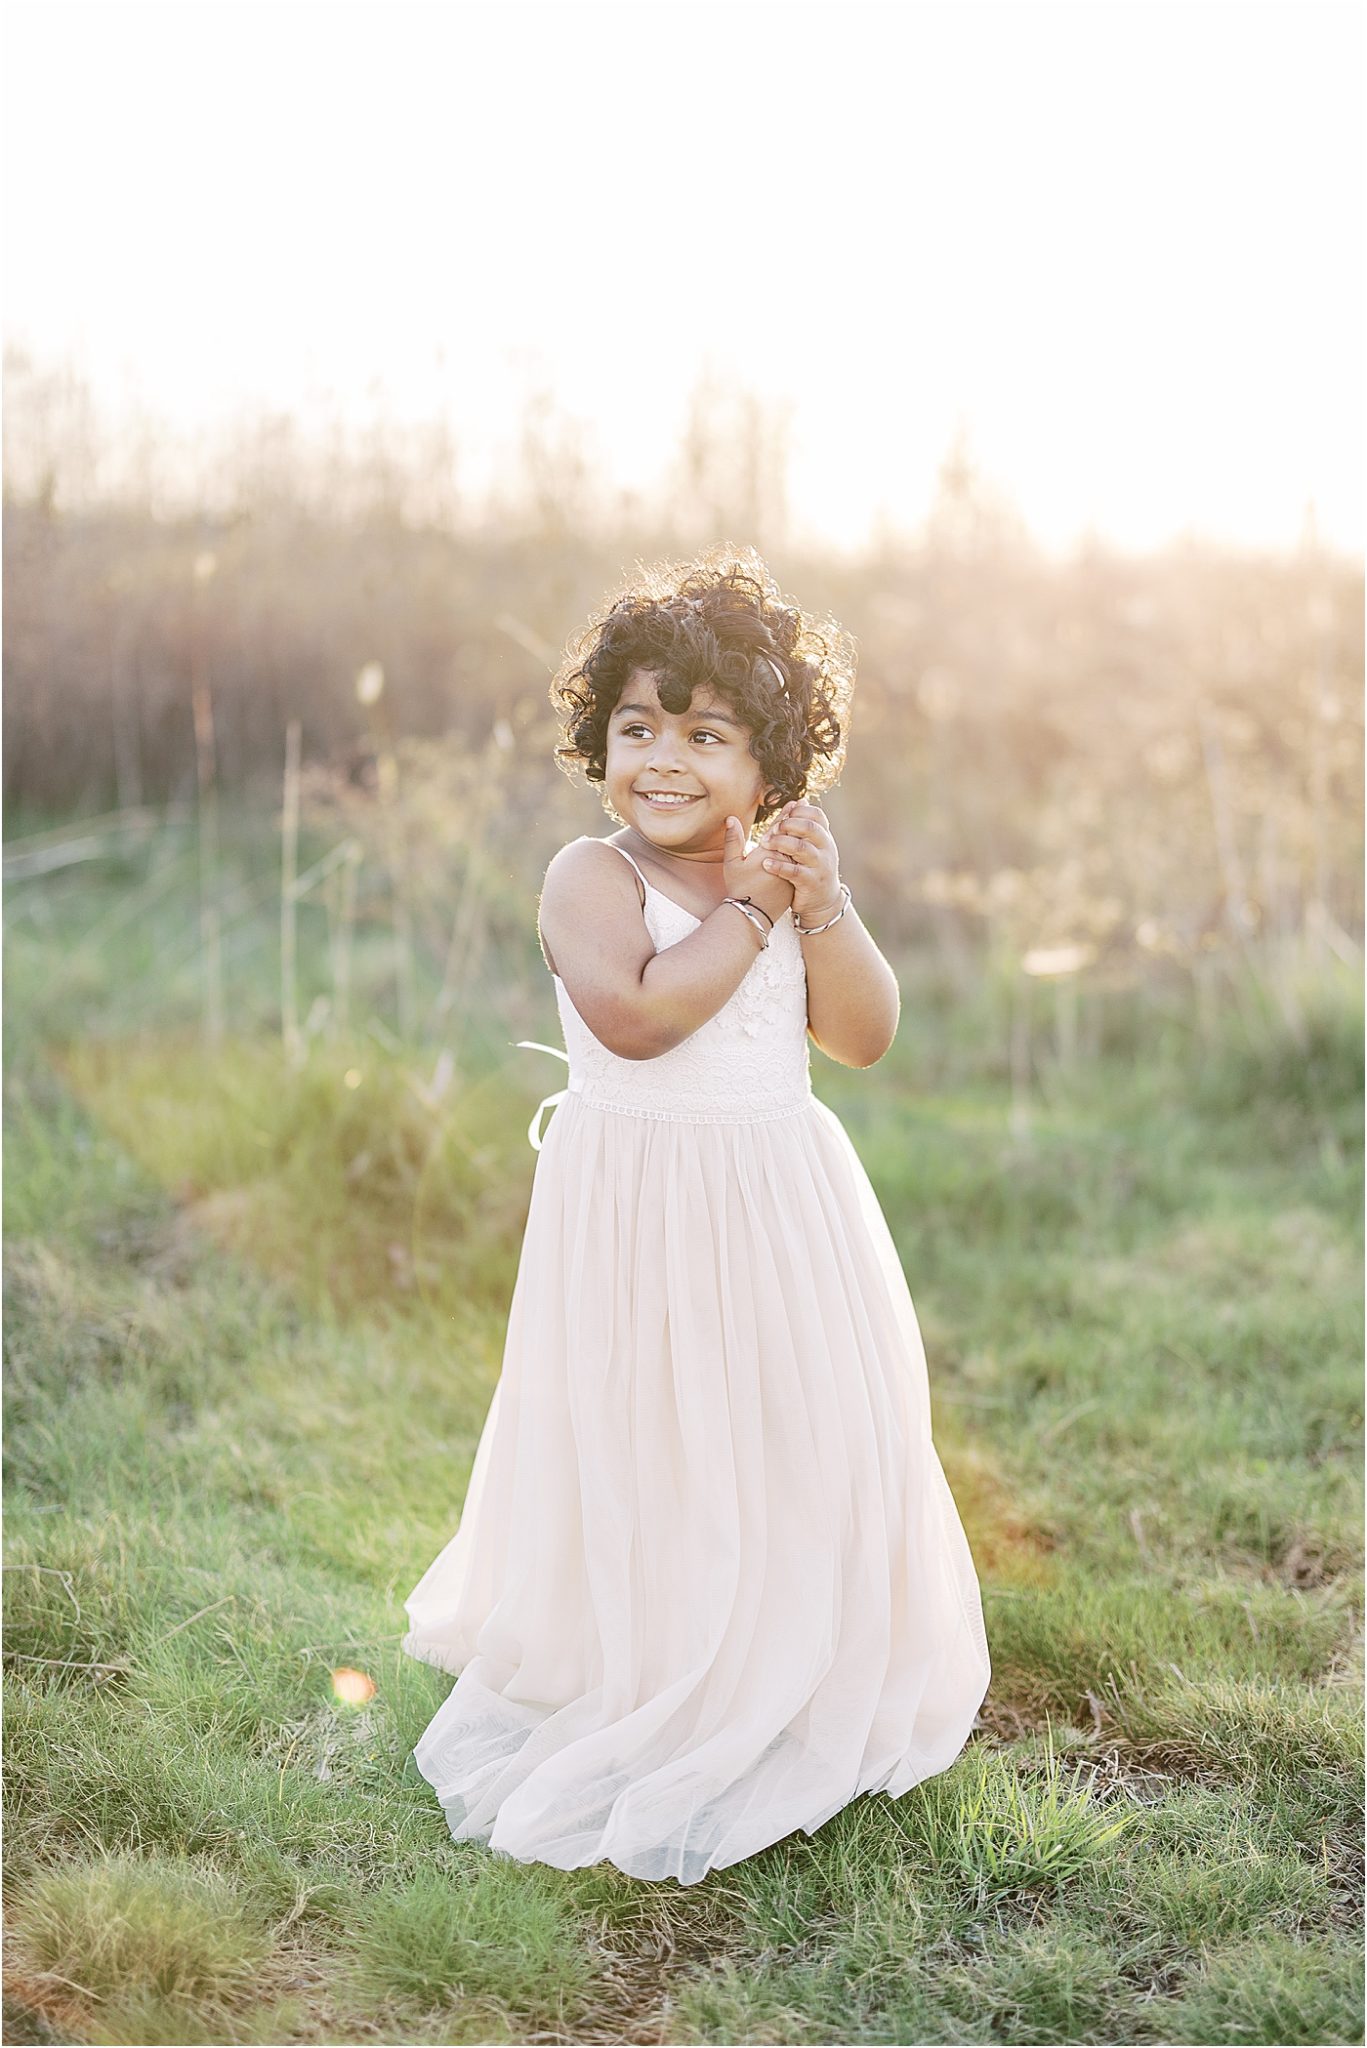 Young toddler girl in a beautiful dress during sunset. Photo by Lindsay Konopa Photography, natural light photographer in Indy.